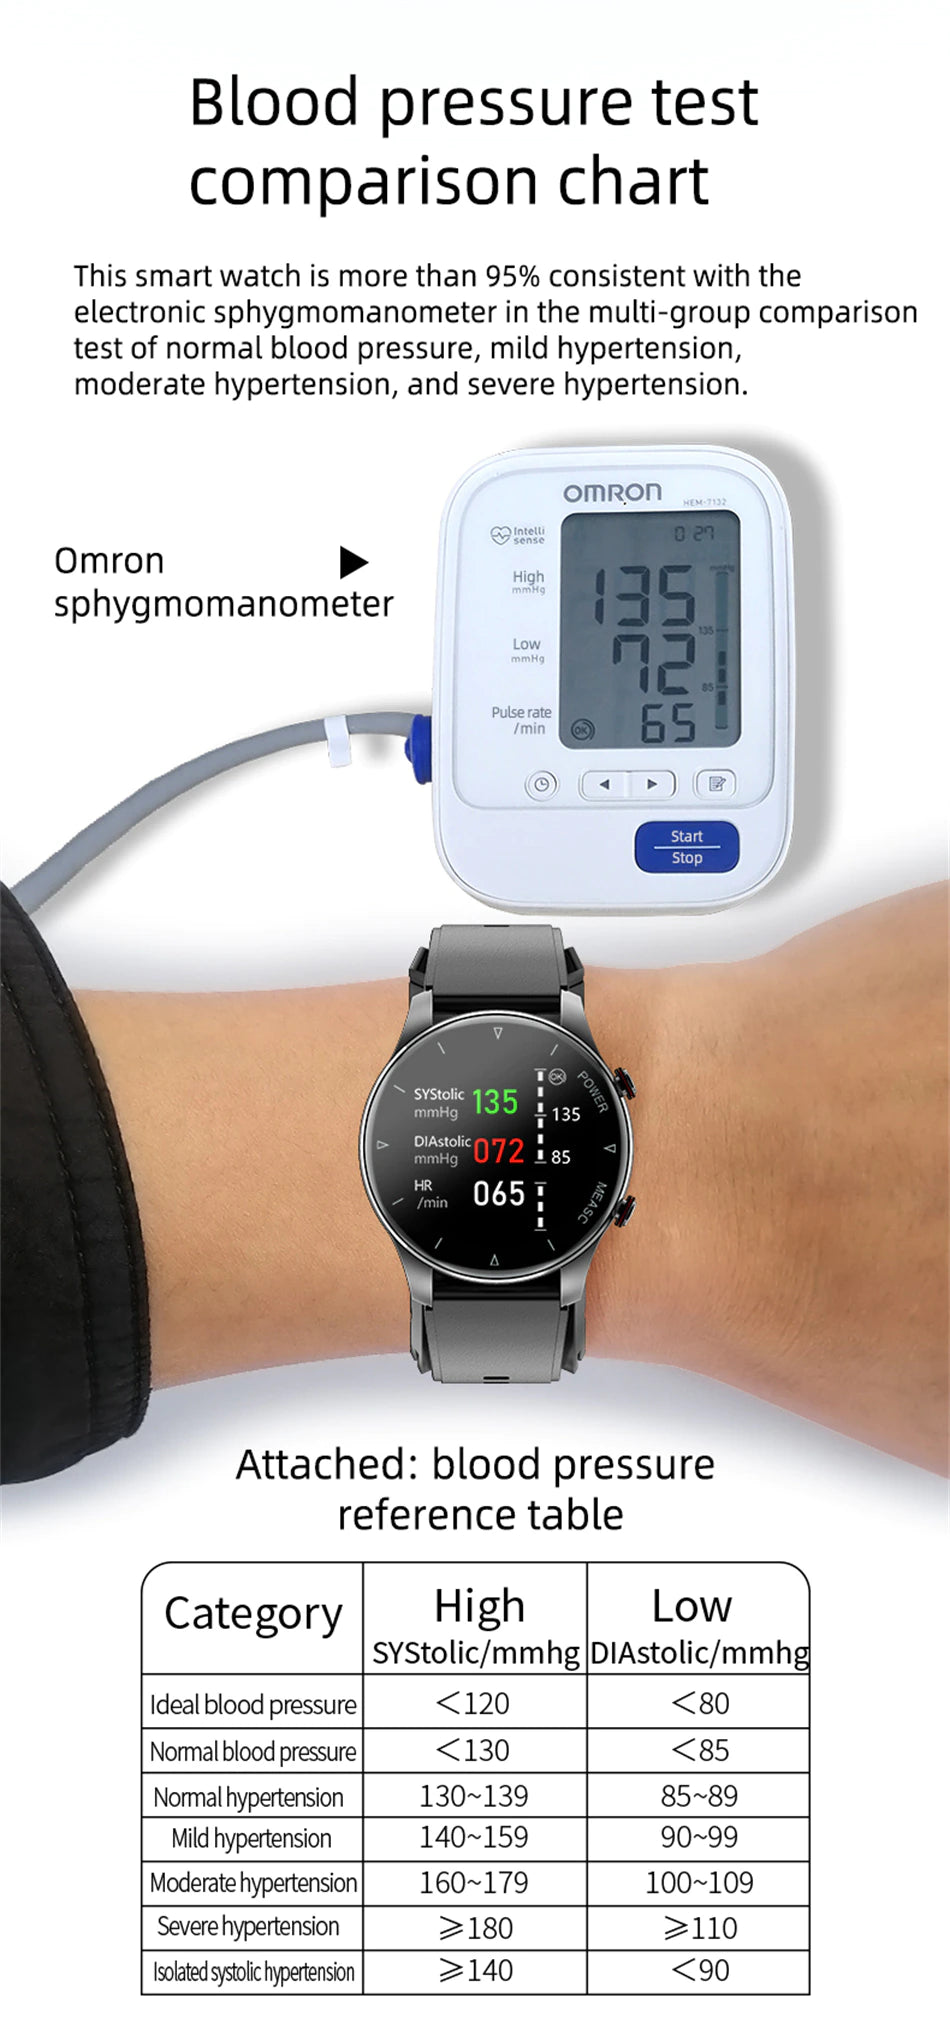 How accurate is a Blood Pressure Watch?